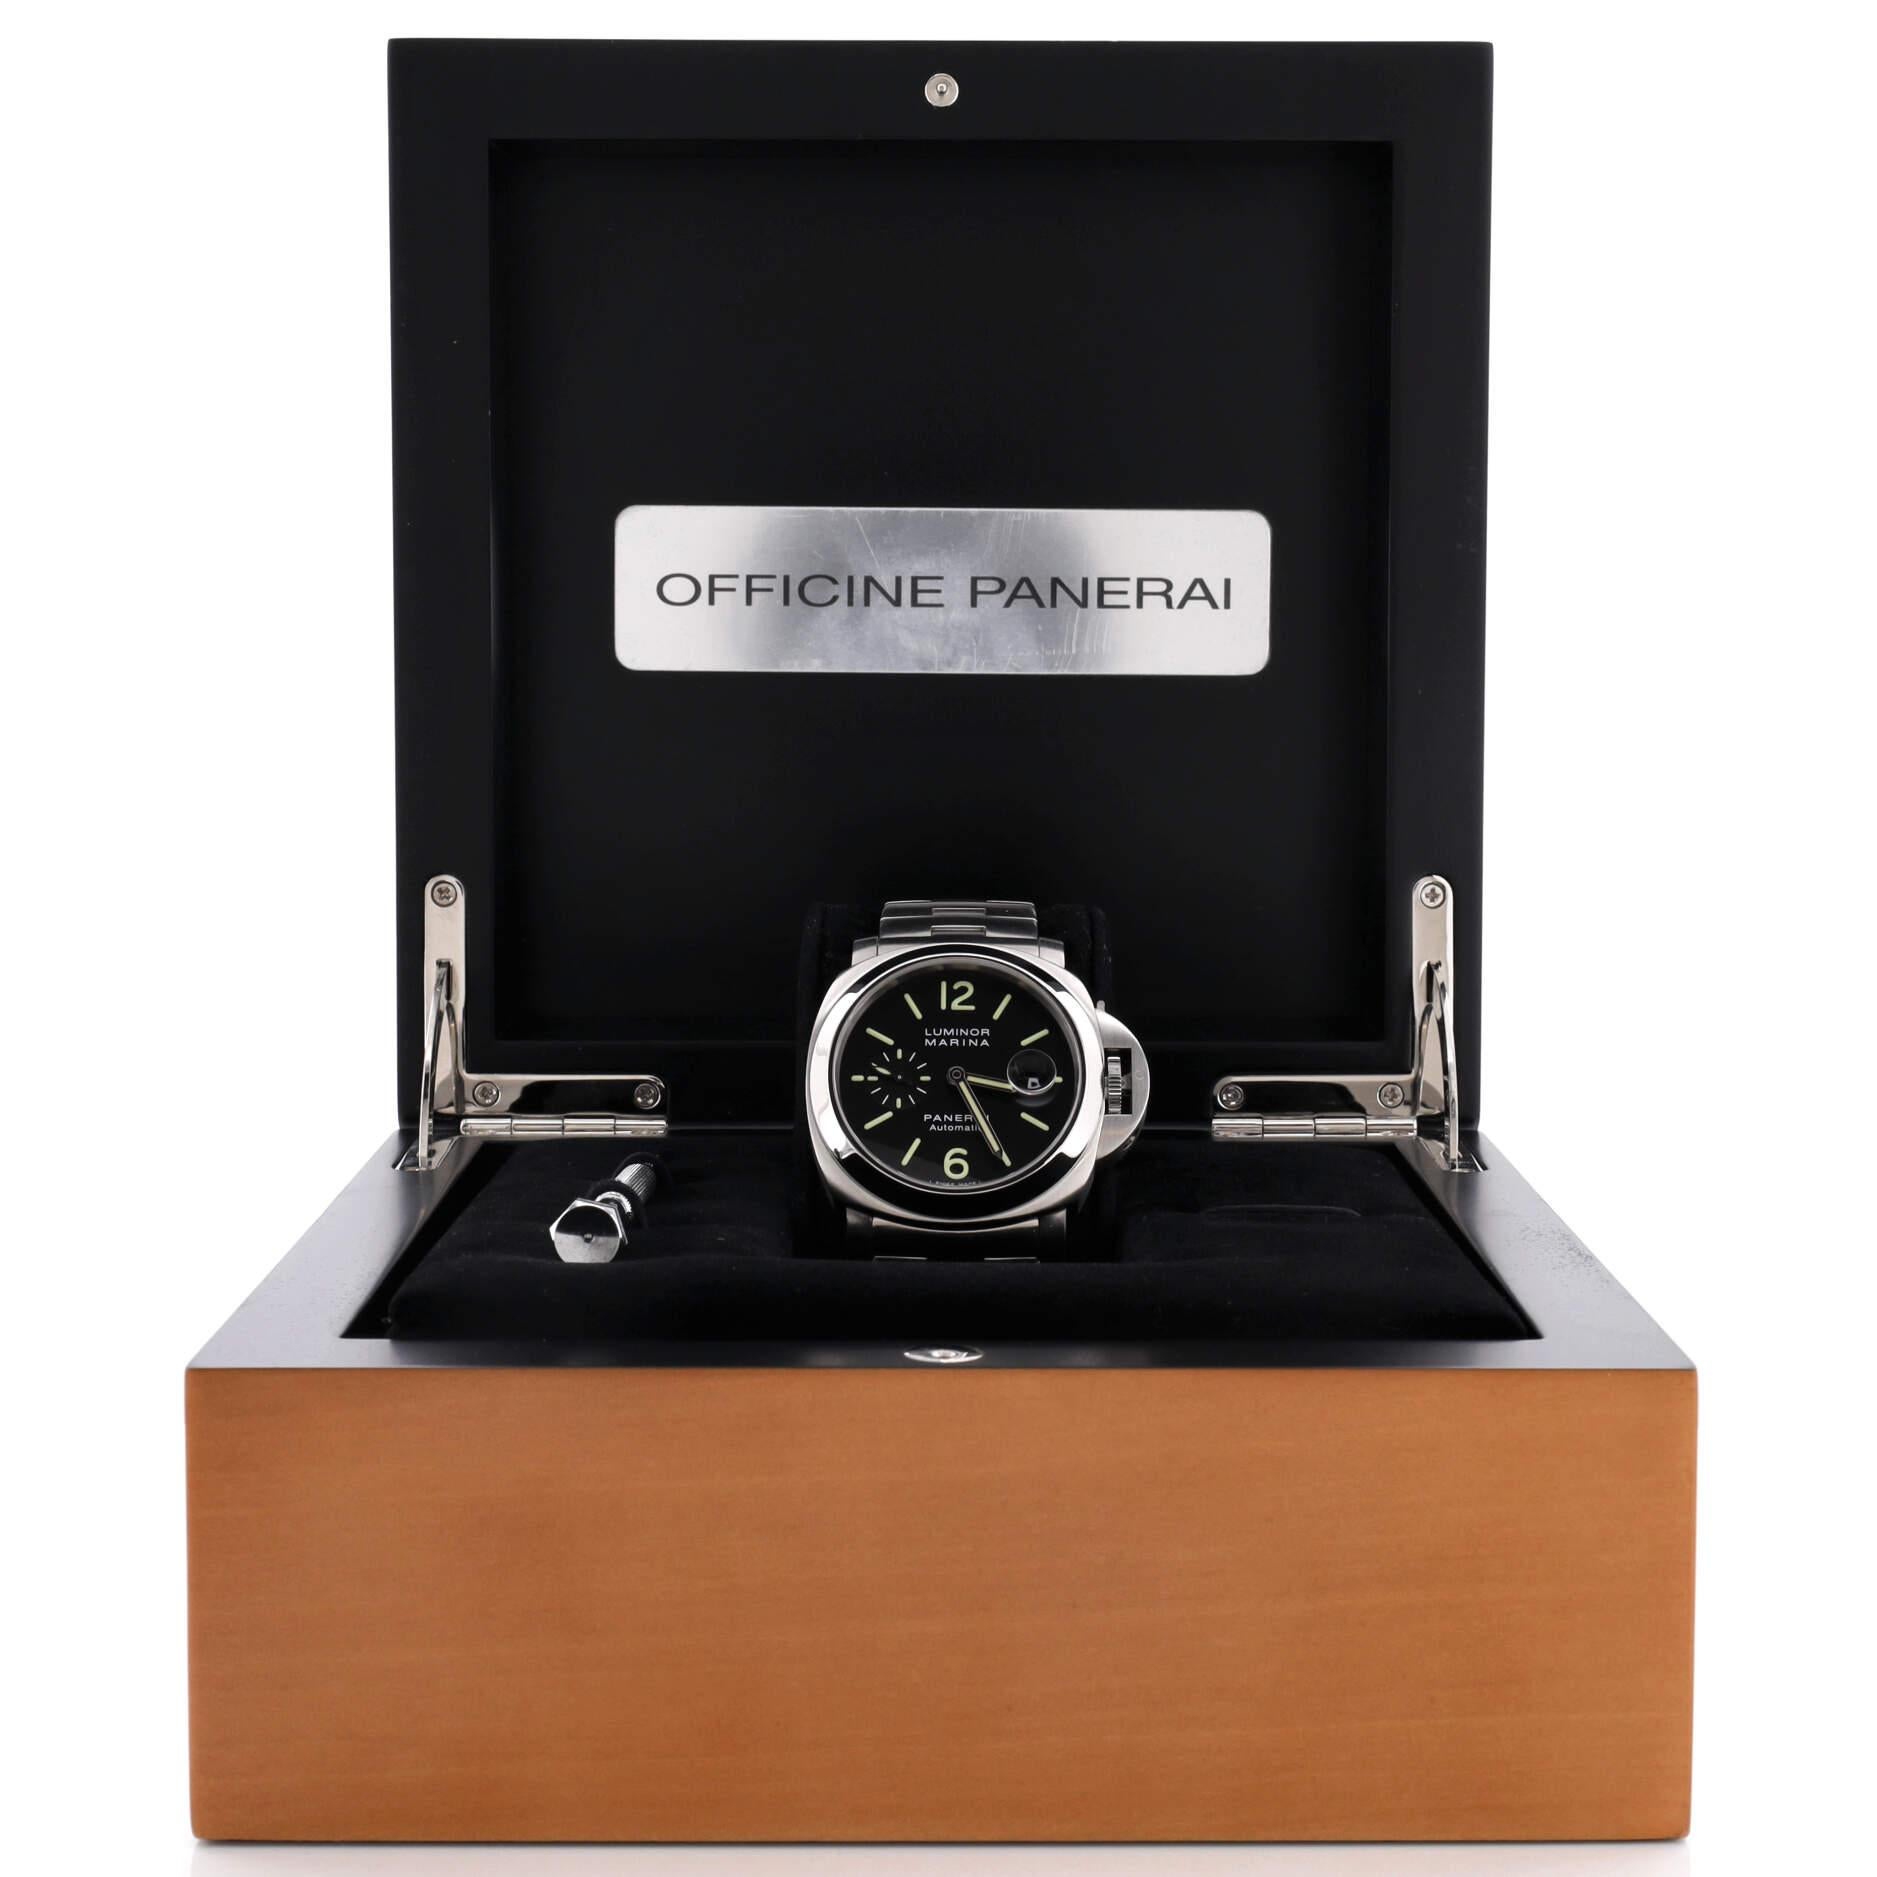 Condition: Very good. Moderate scratches and wear throughout. Wear and scratches on case and bracelet.
Accessories: Box, Instruction Booklet
Measurements: Case Size/Width: 44mm, Watch Height: 16mm, Band Width: 24mm, Wrist circumference: